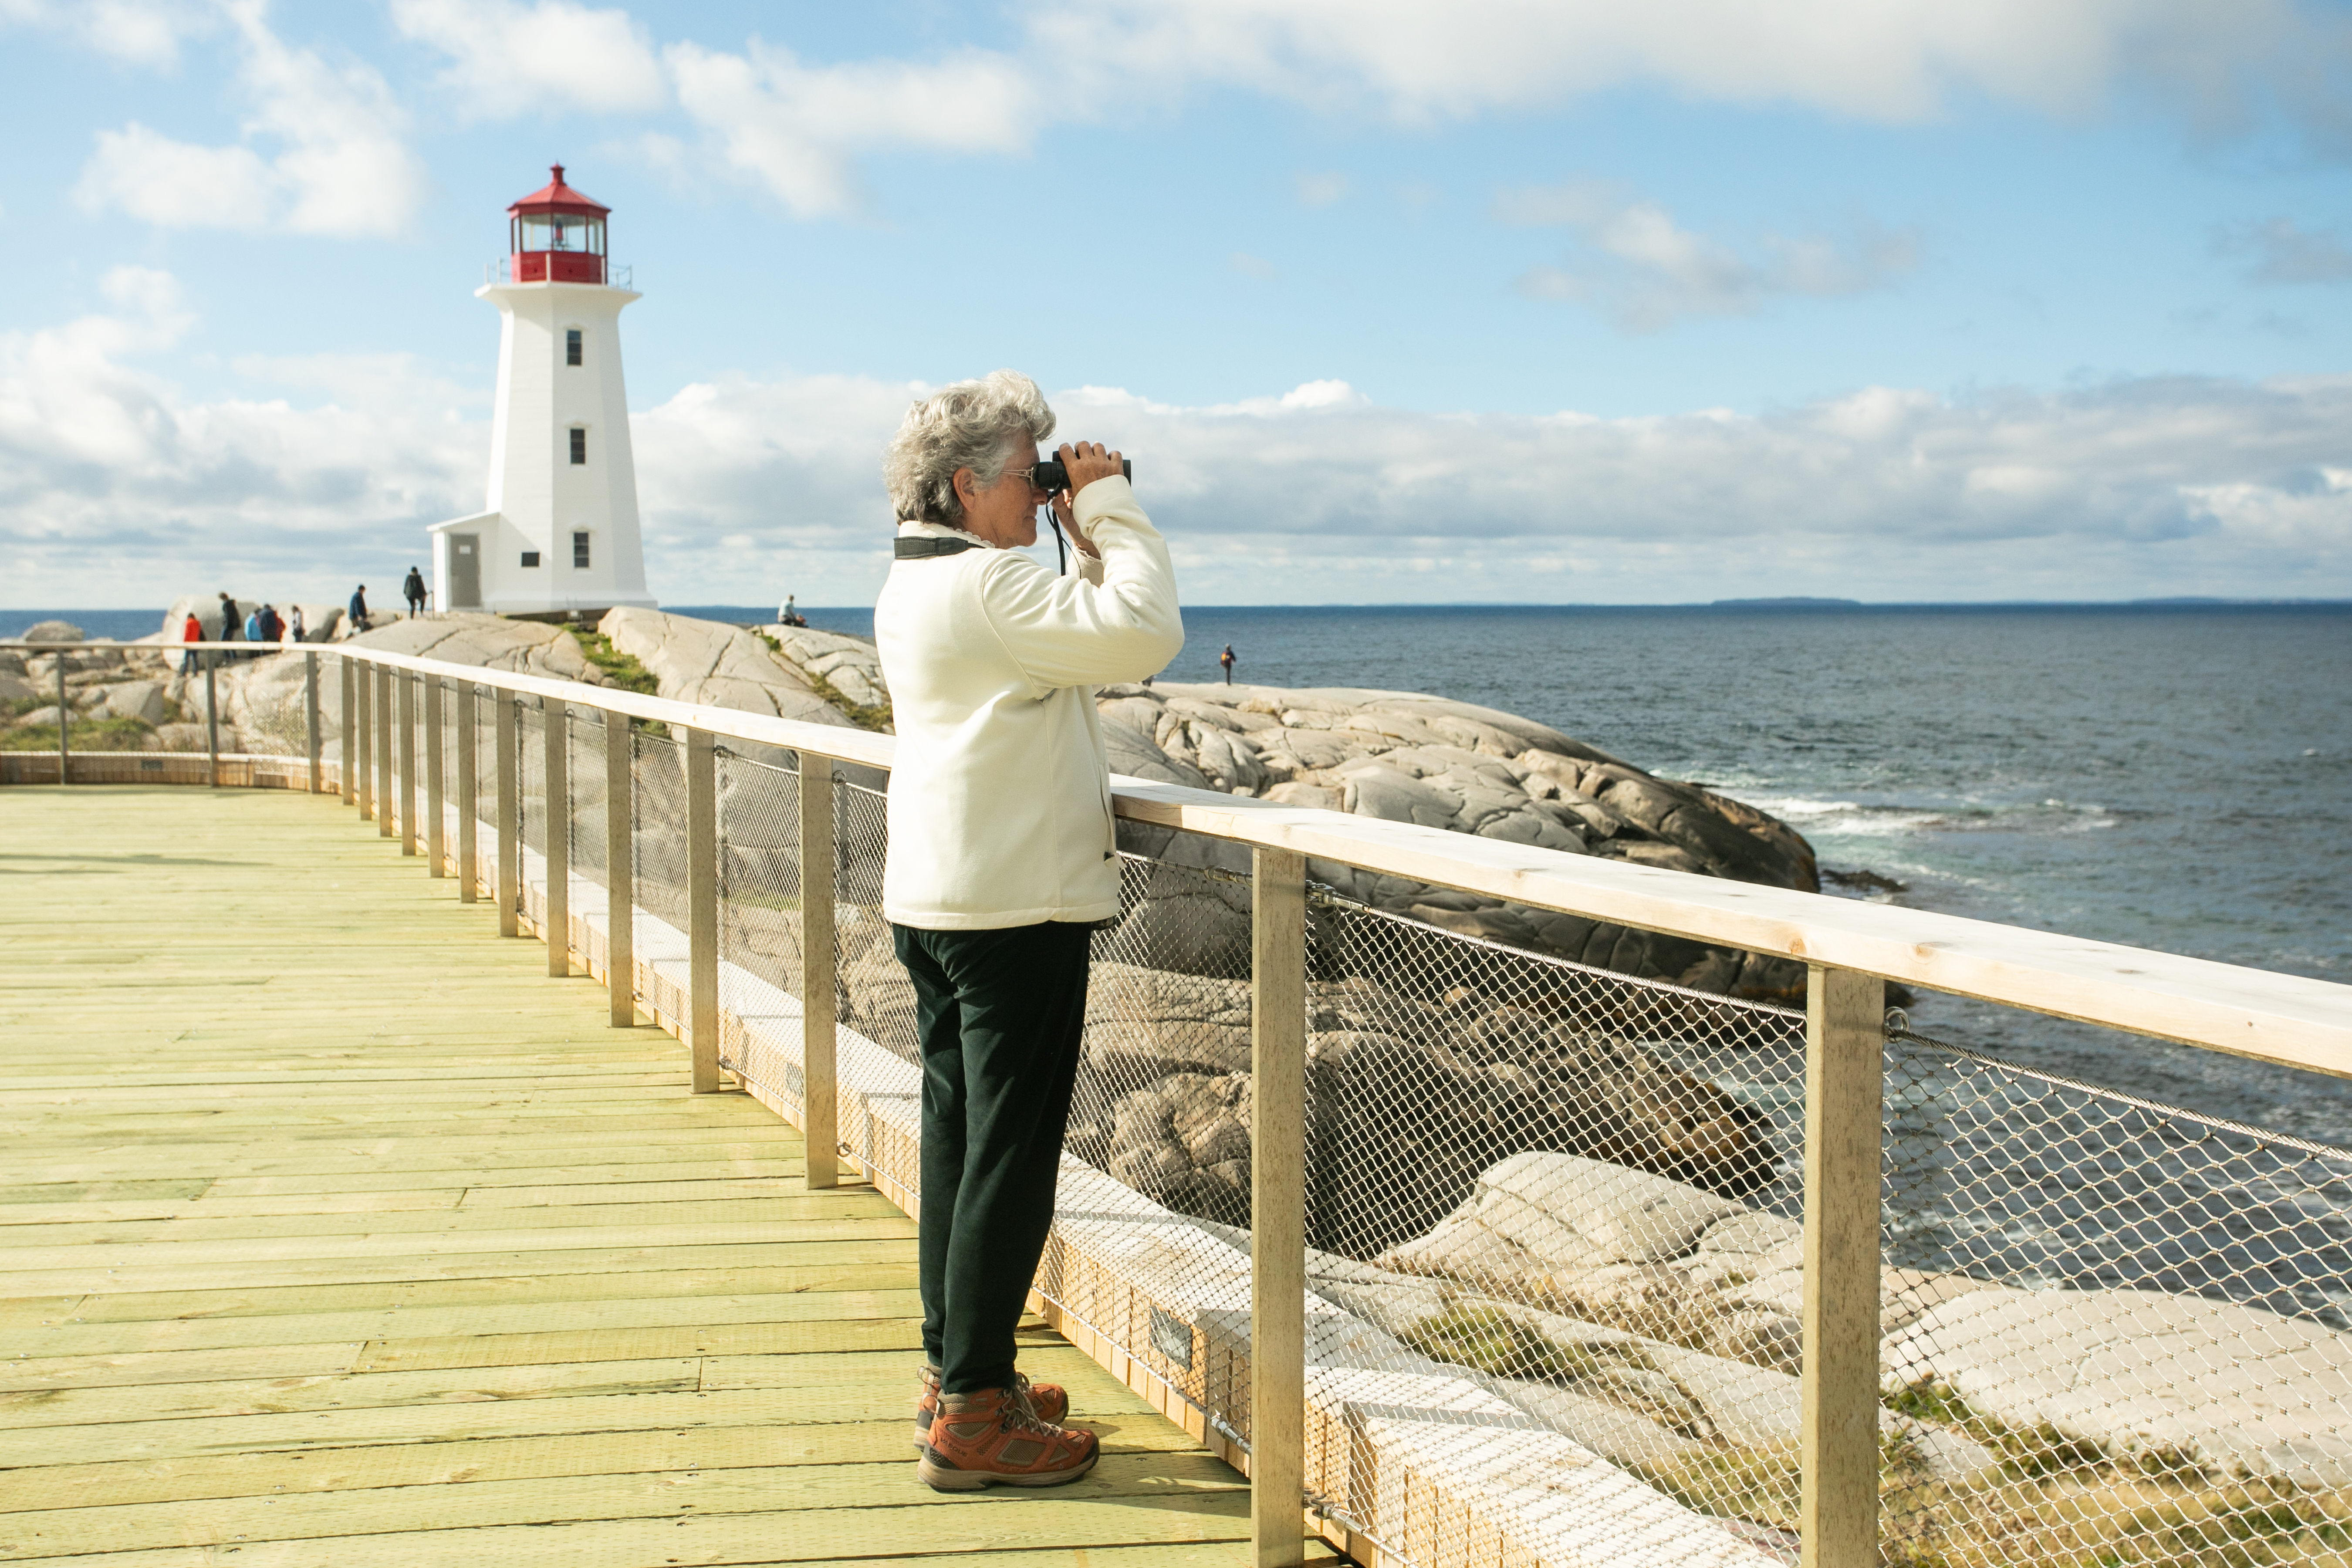 Person with short grey hair on the Peggy's Cove viewing deck using binoculars to look out at the ocean. The white and red lighthouse is in the background. 